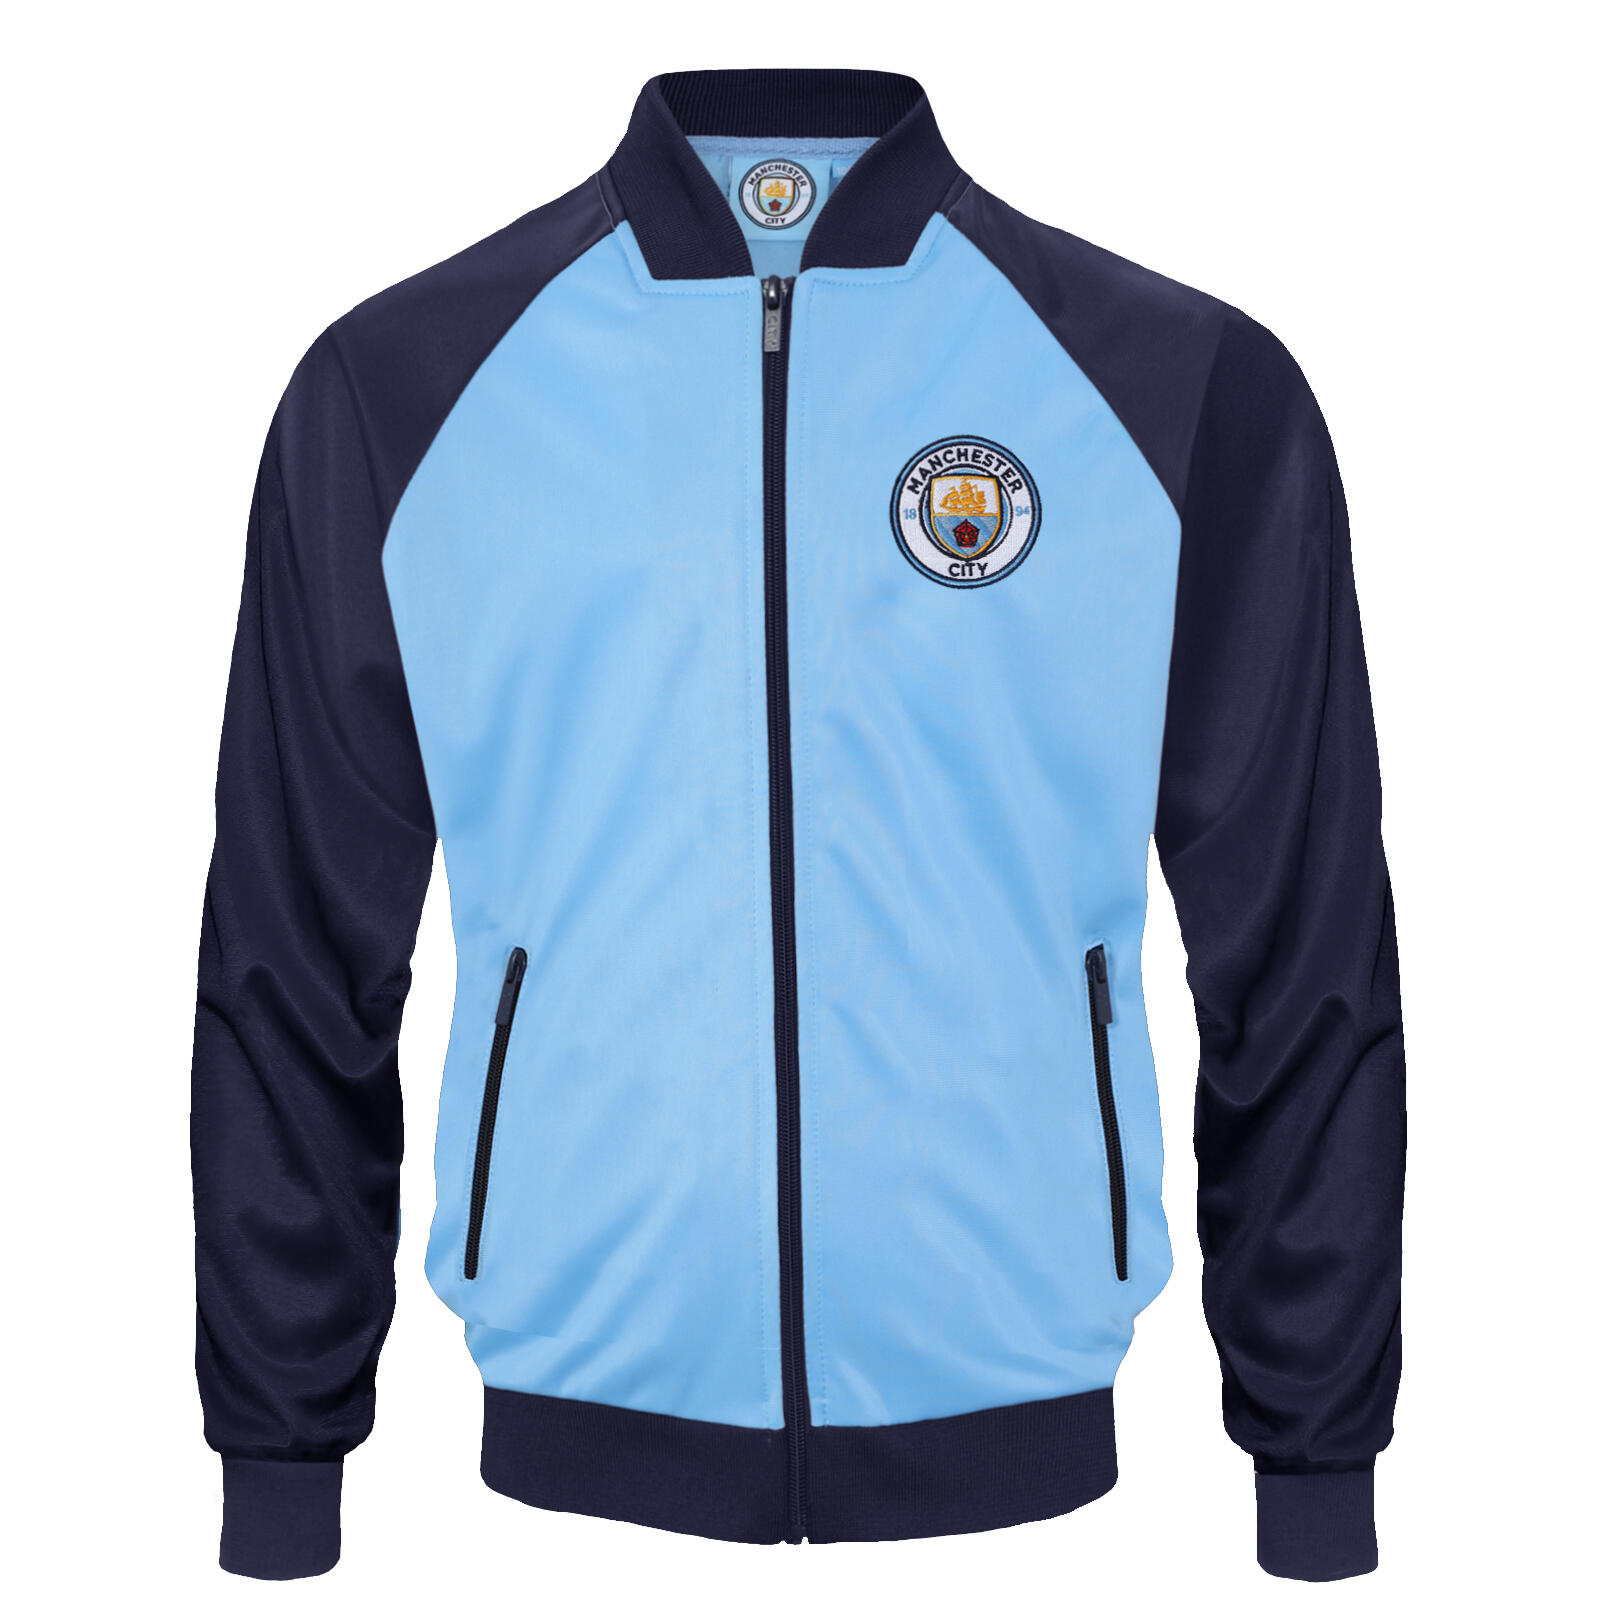 Manchester City Boys Jacket Track Top Retro Kids OFFICIAL Football Gift 1/5